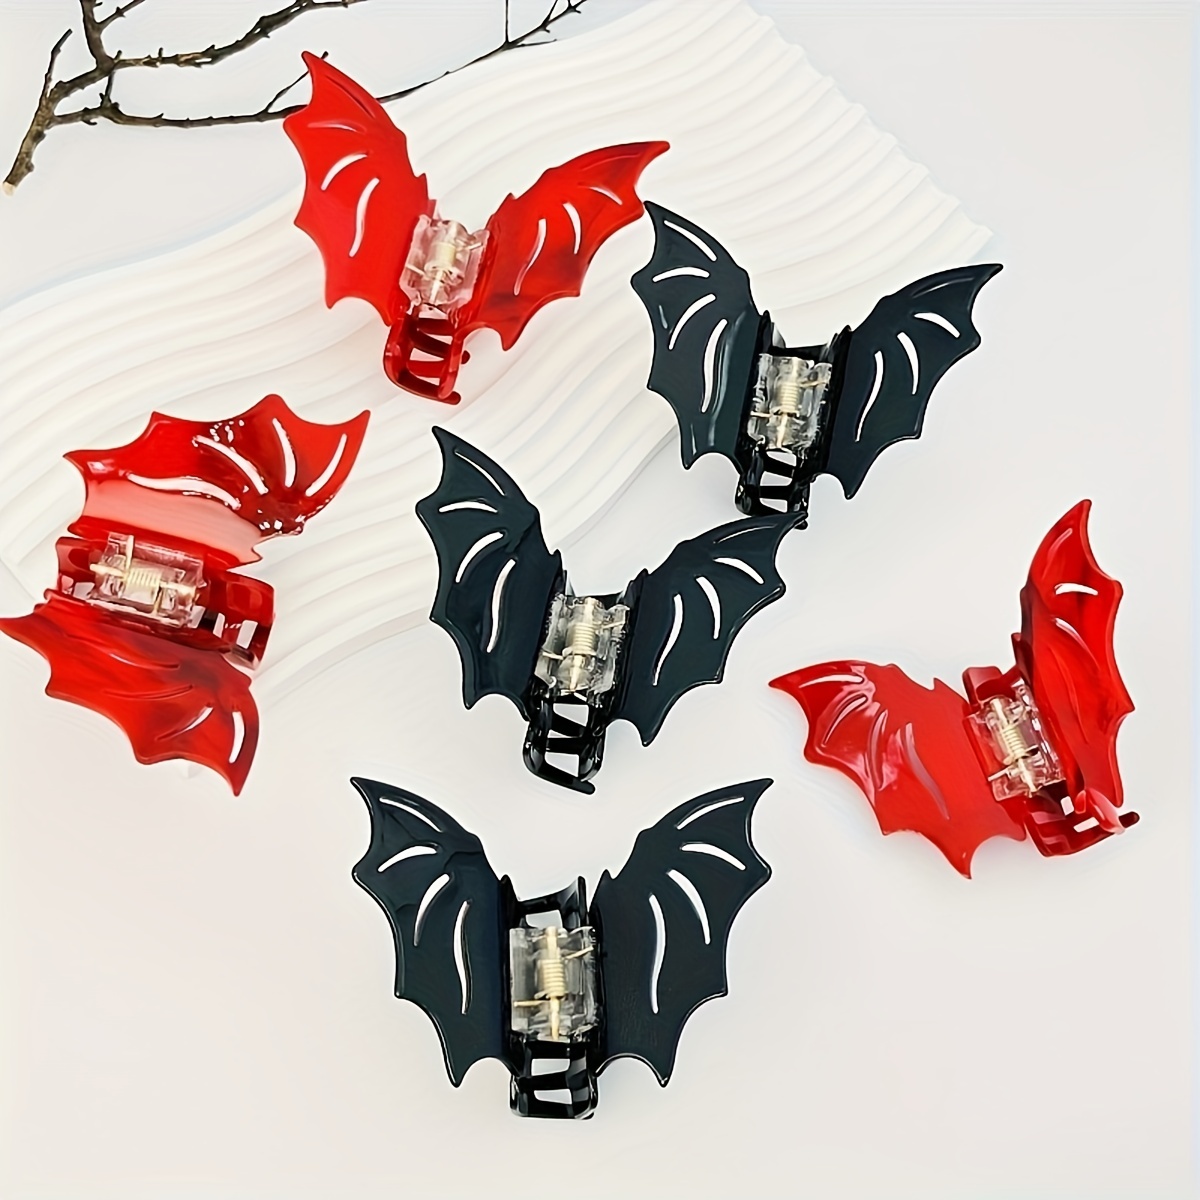 

2pcs/set Halloween Bat Shaped Hair Clips Acetate Animal Hair Pins Ponytail Holder Halloween Party Cosplay Bangs Clips For Women